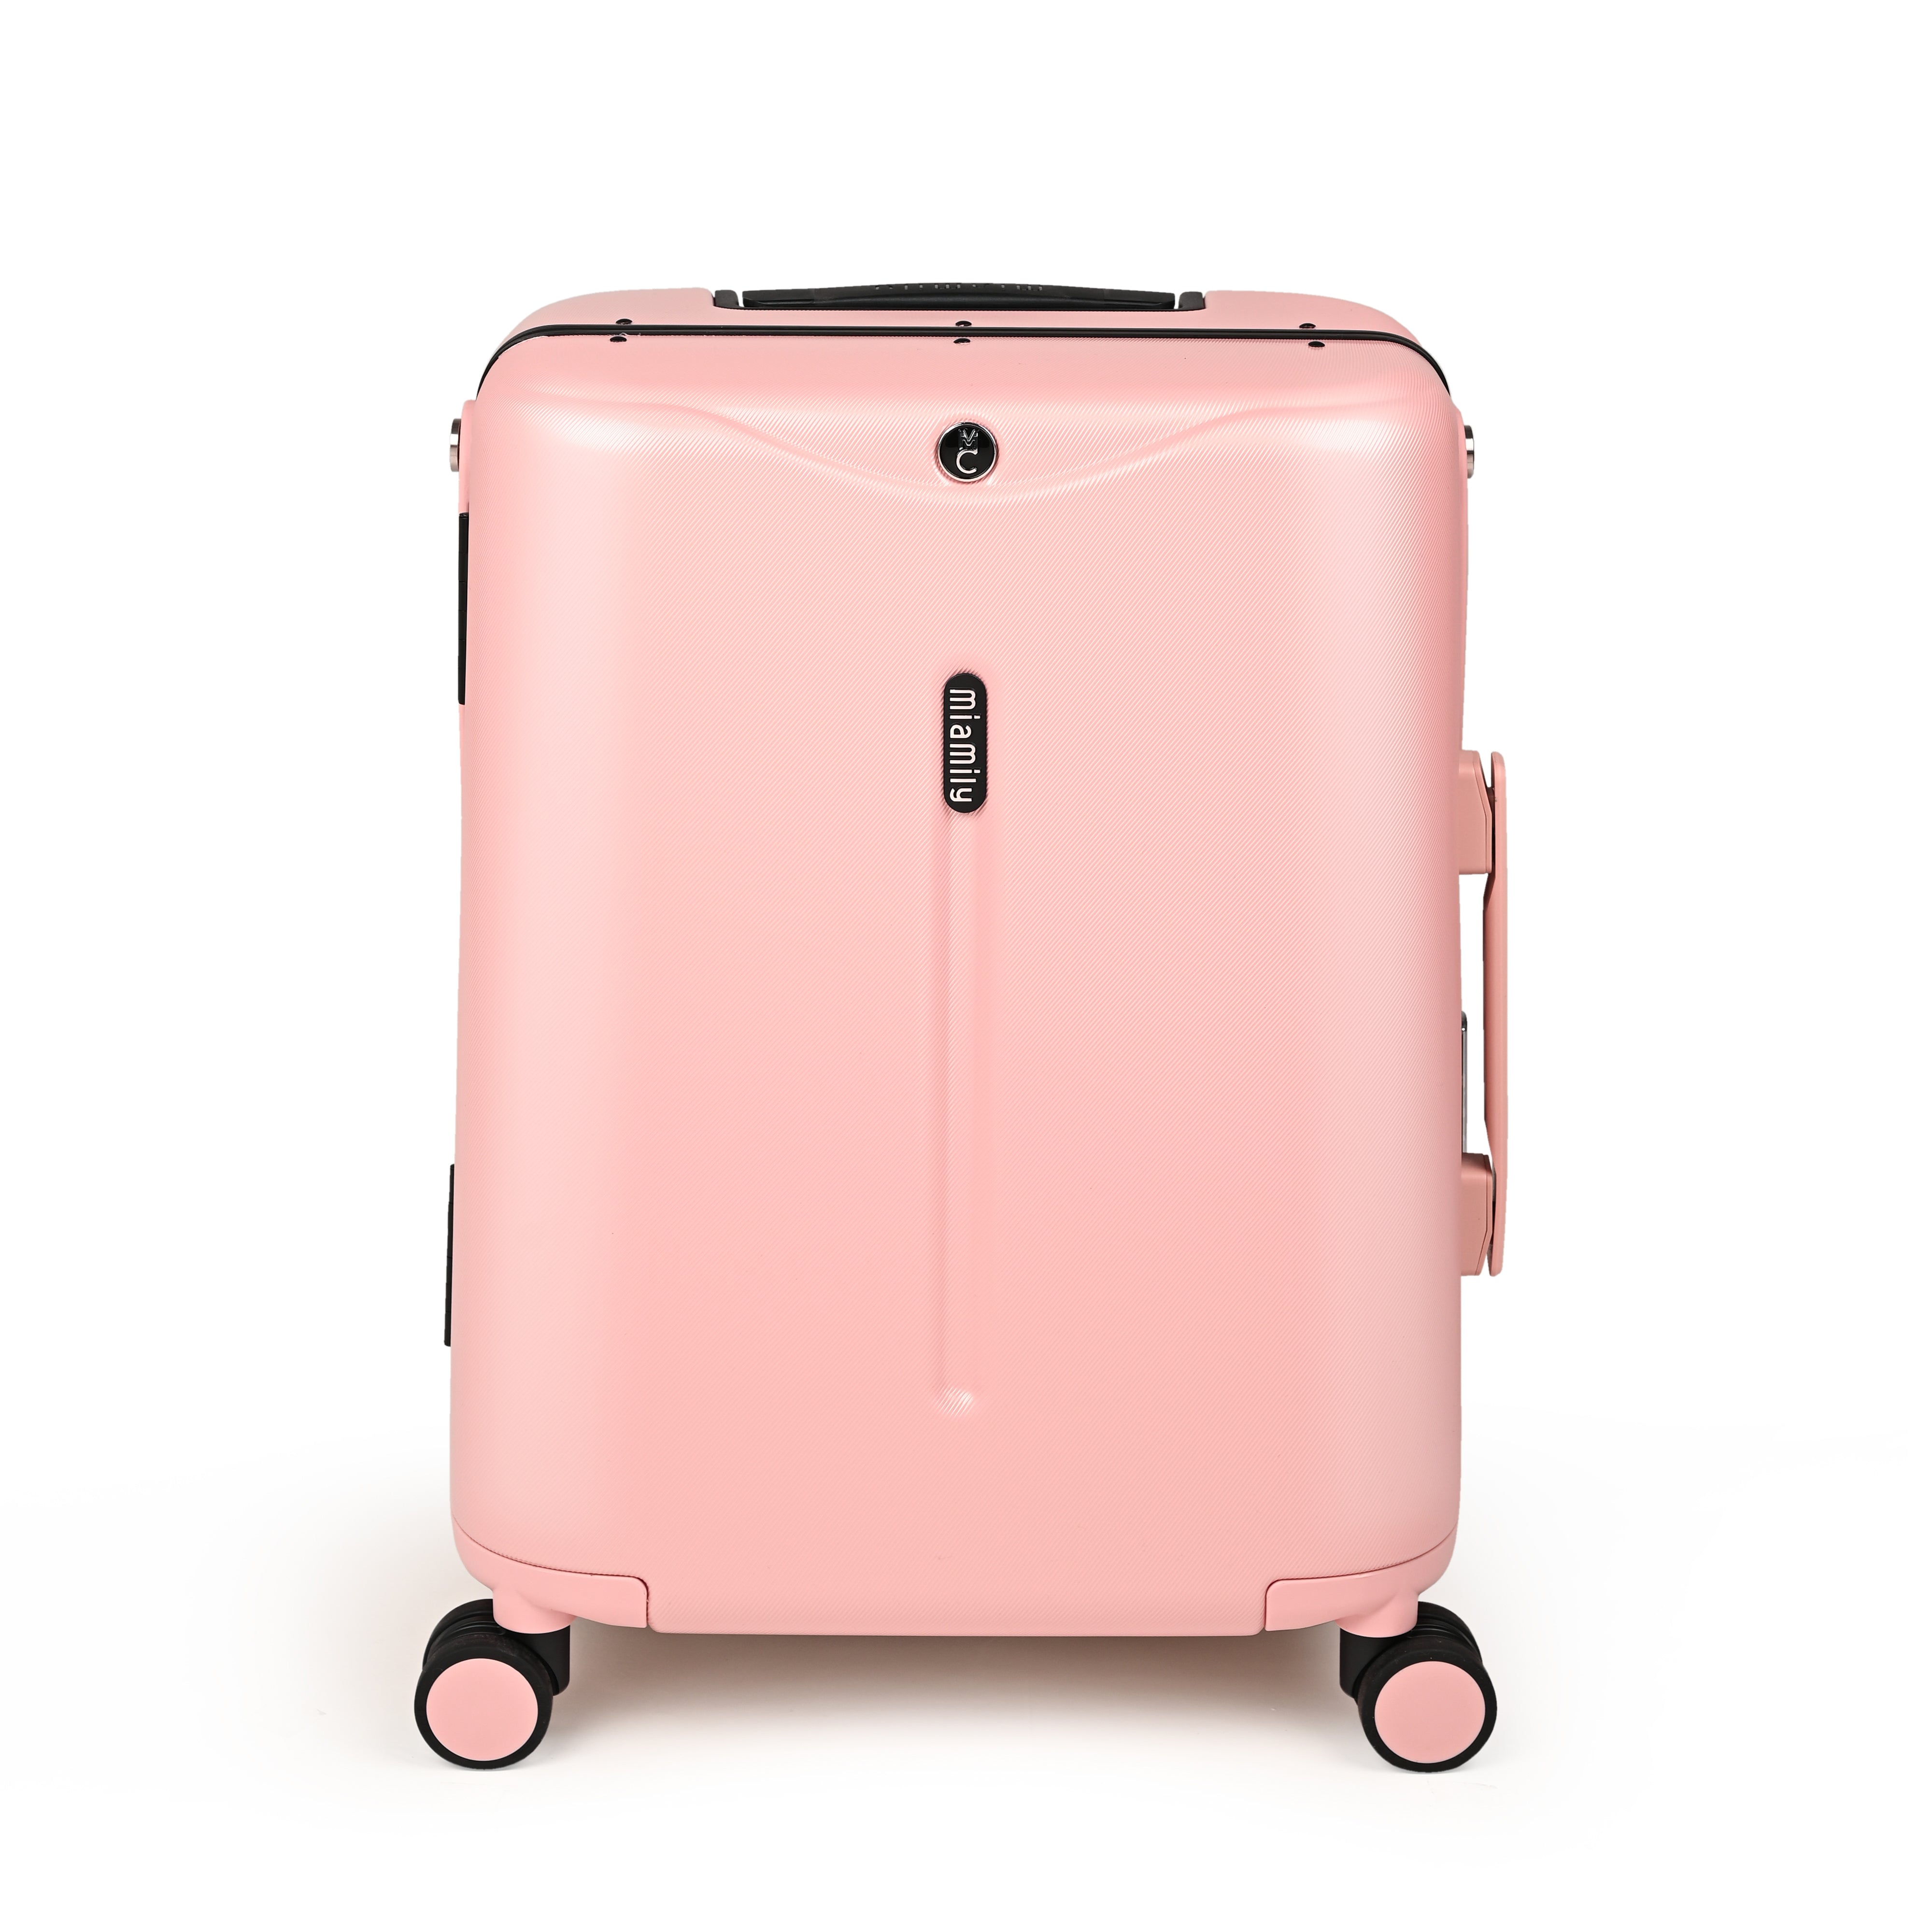 Miamily Dusty Pink Ride-On Trolley Carry-On Luggage 18 inches